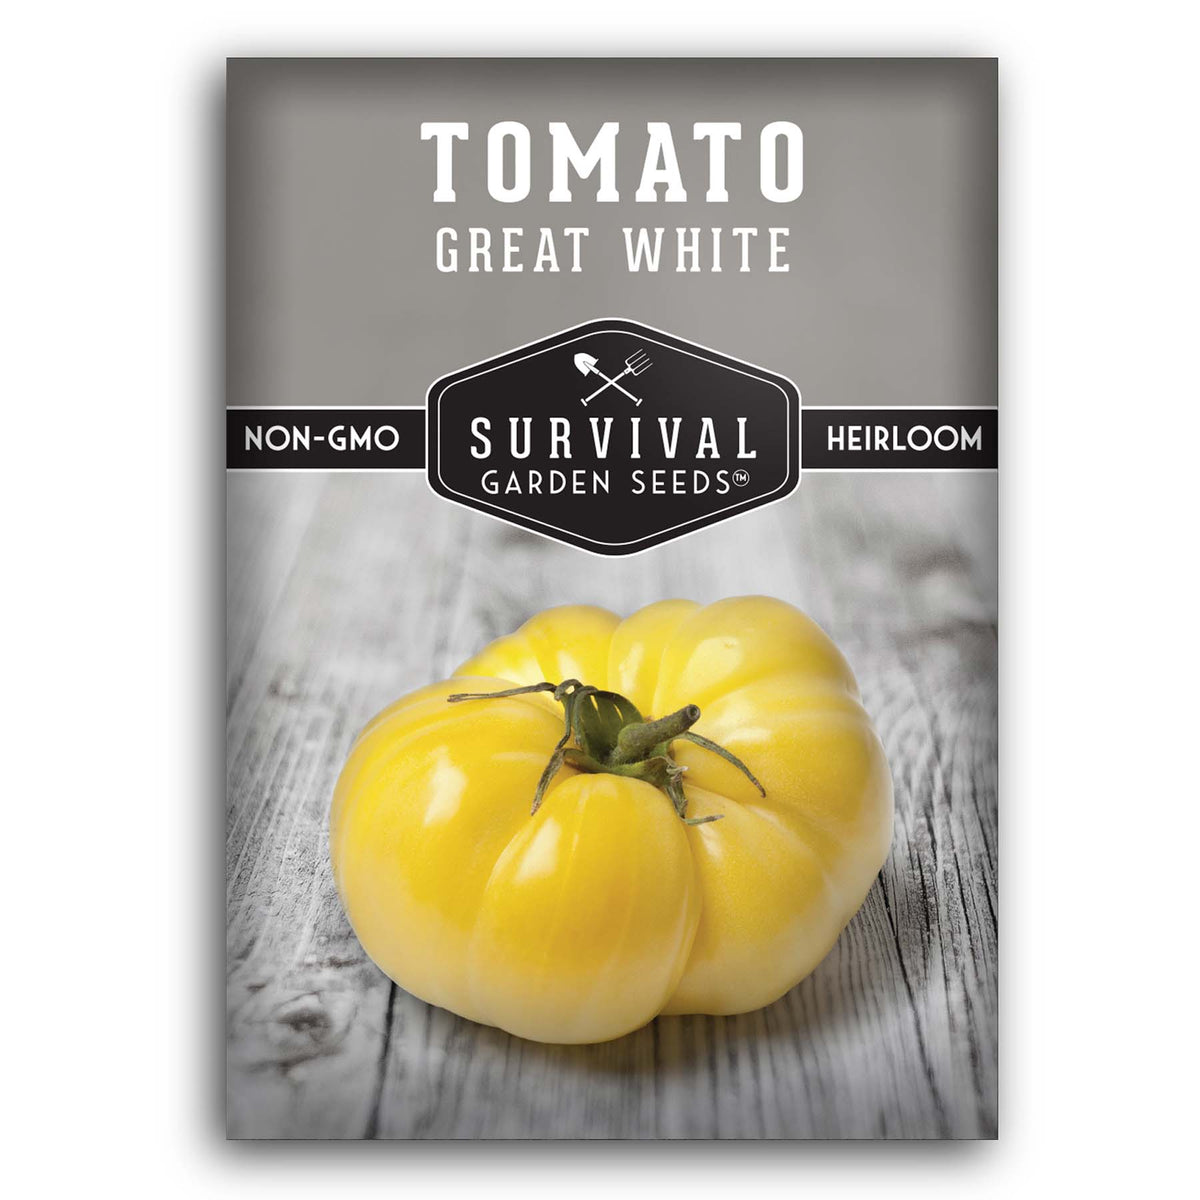 Great White Tomato seeds for planting